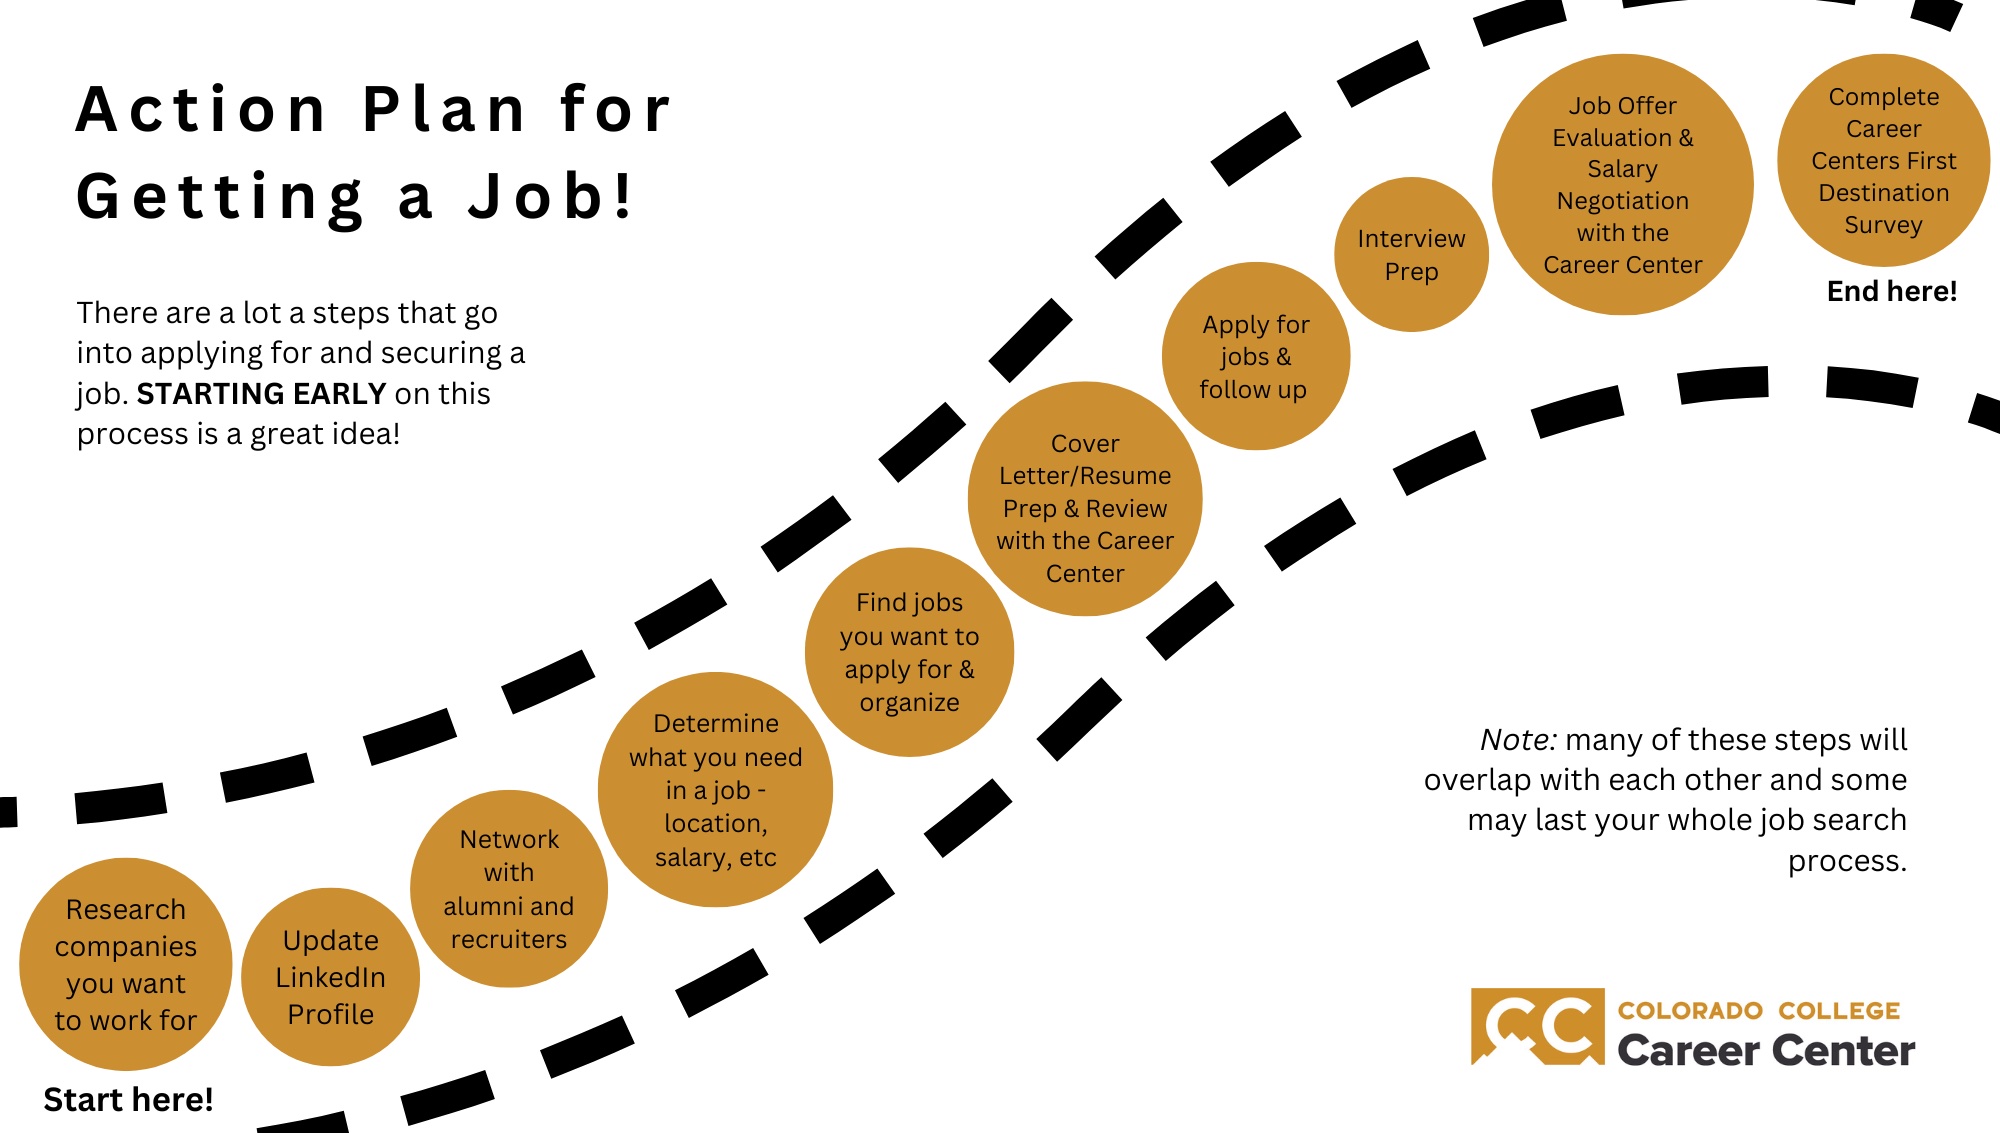 Image titled "action plan for getting a job" outlining steps on a road. Steps include researching companies of interest, updating your LinkedIn, finding jobs, cover letter and resume preparation, interview preparation, and evaluation of a job offer. To the side of the image: Note that many of these steps will overlap, and be sure to start early!